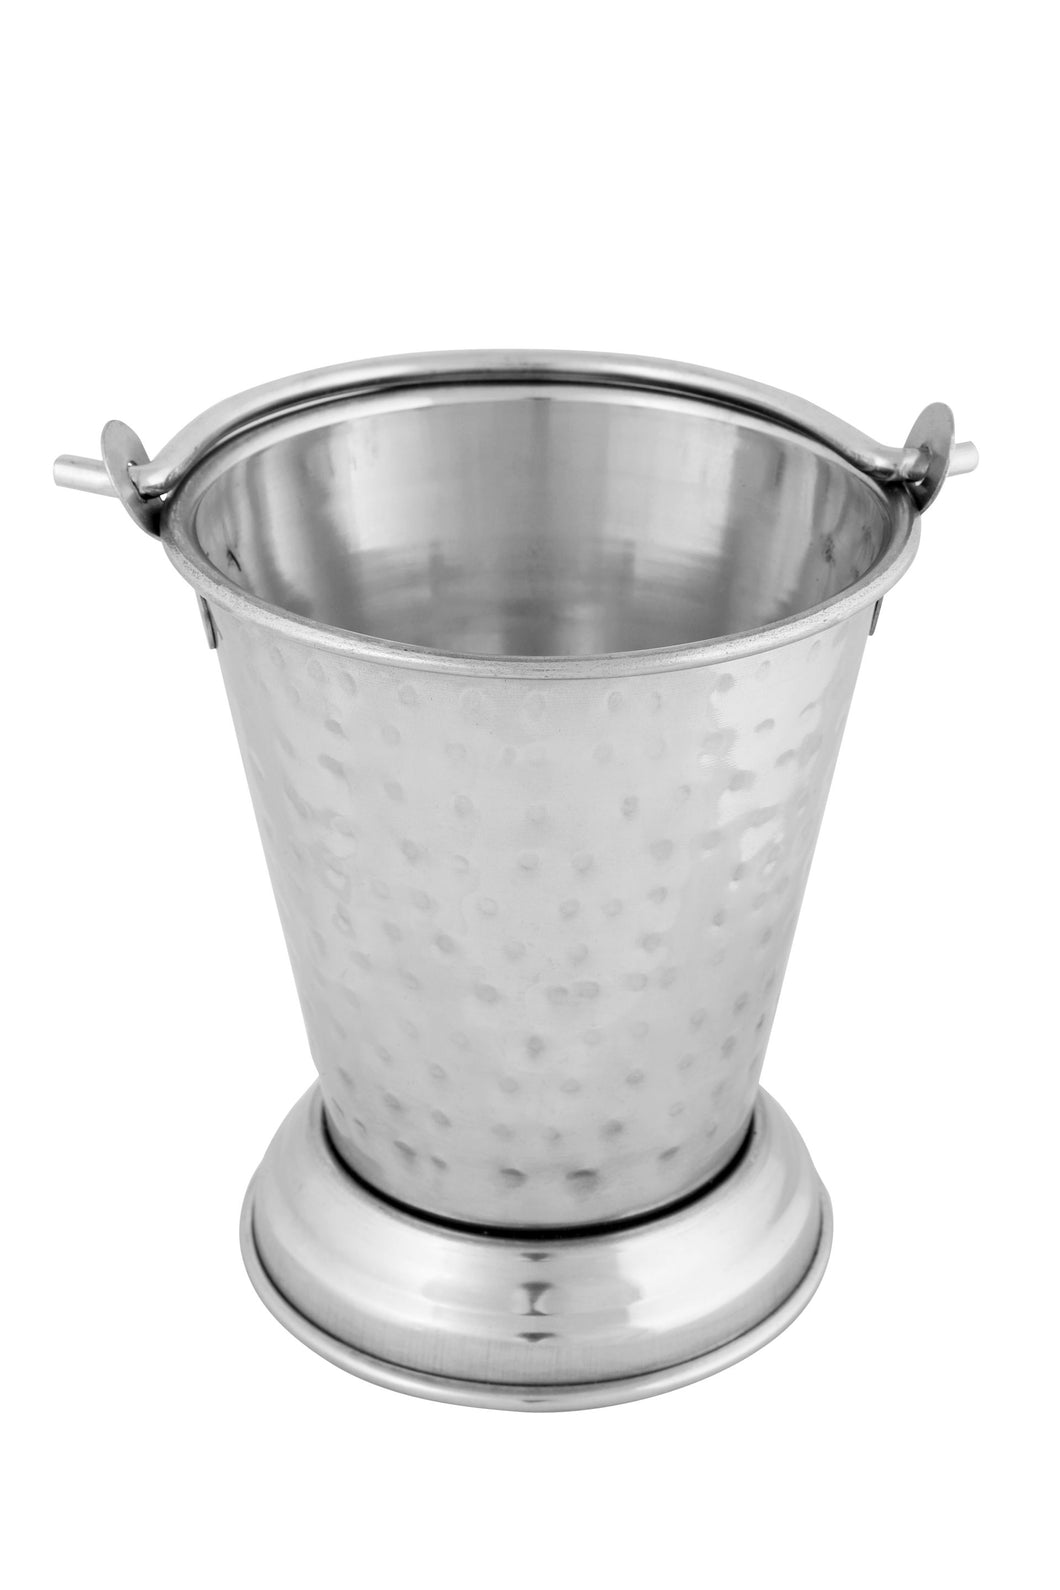 Stainless Steel Hammered Double Wall Balti/Bucket for Serving #2, 400 ML